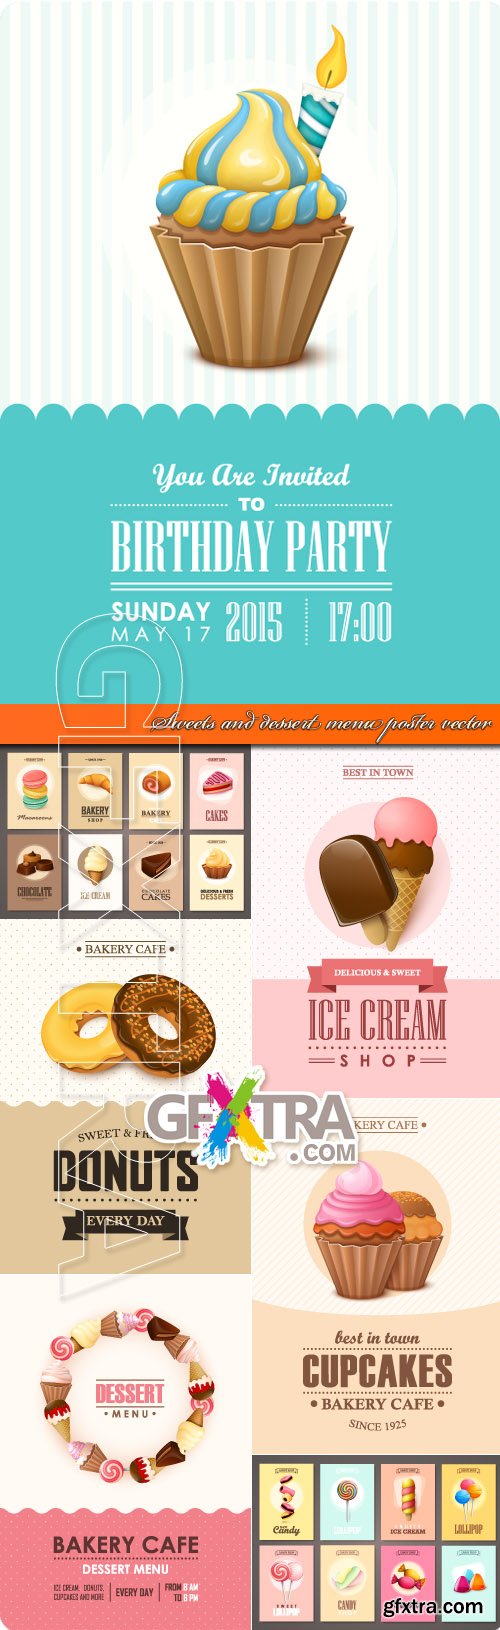 Sweets and dessert menu poster vector